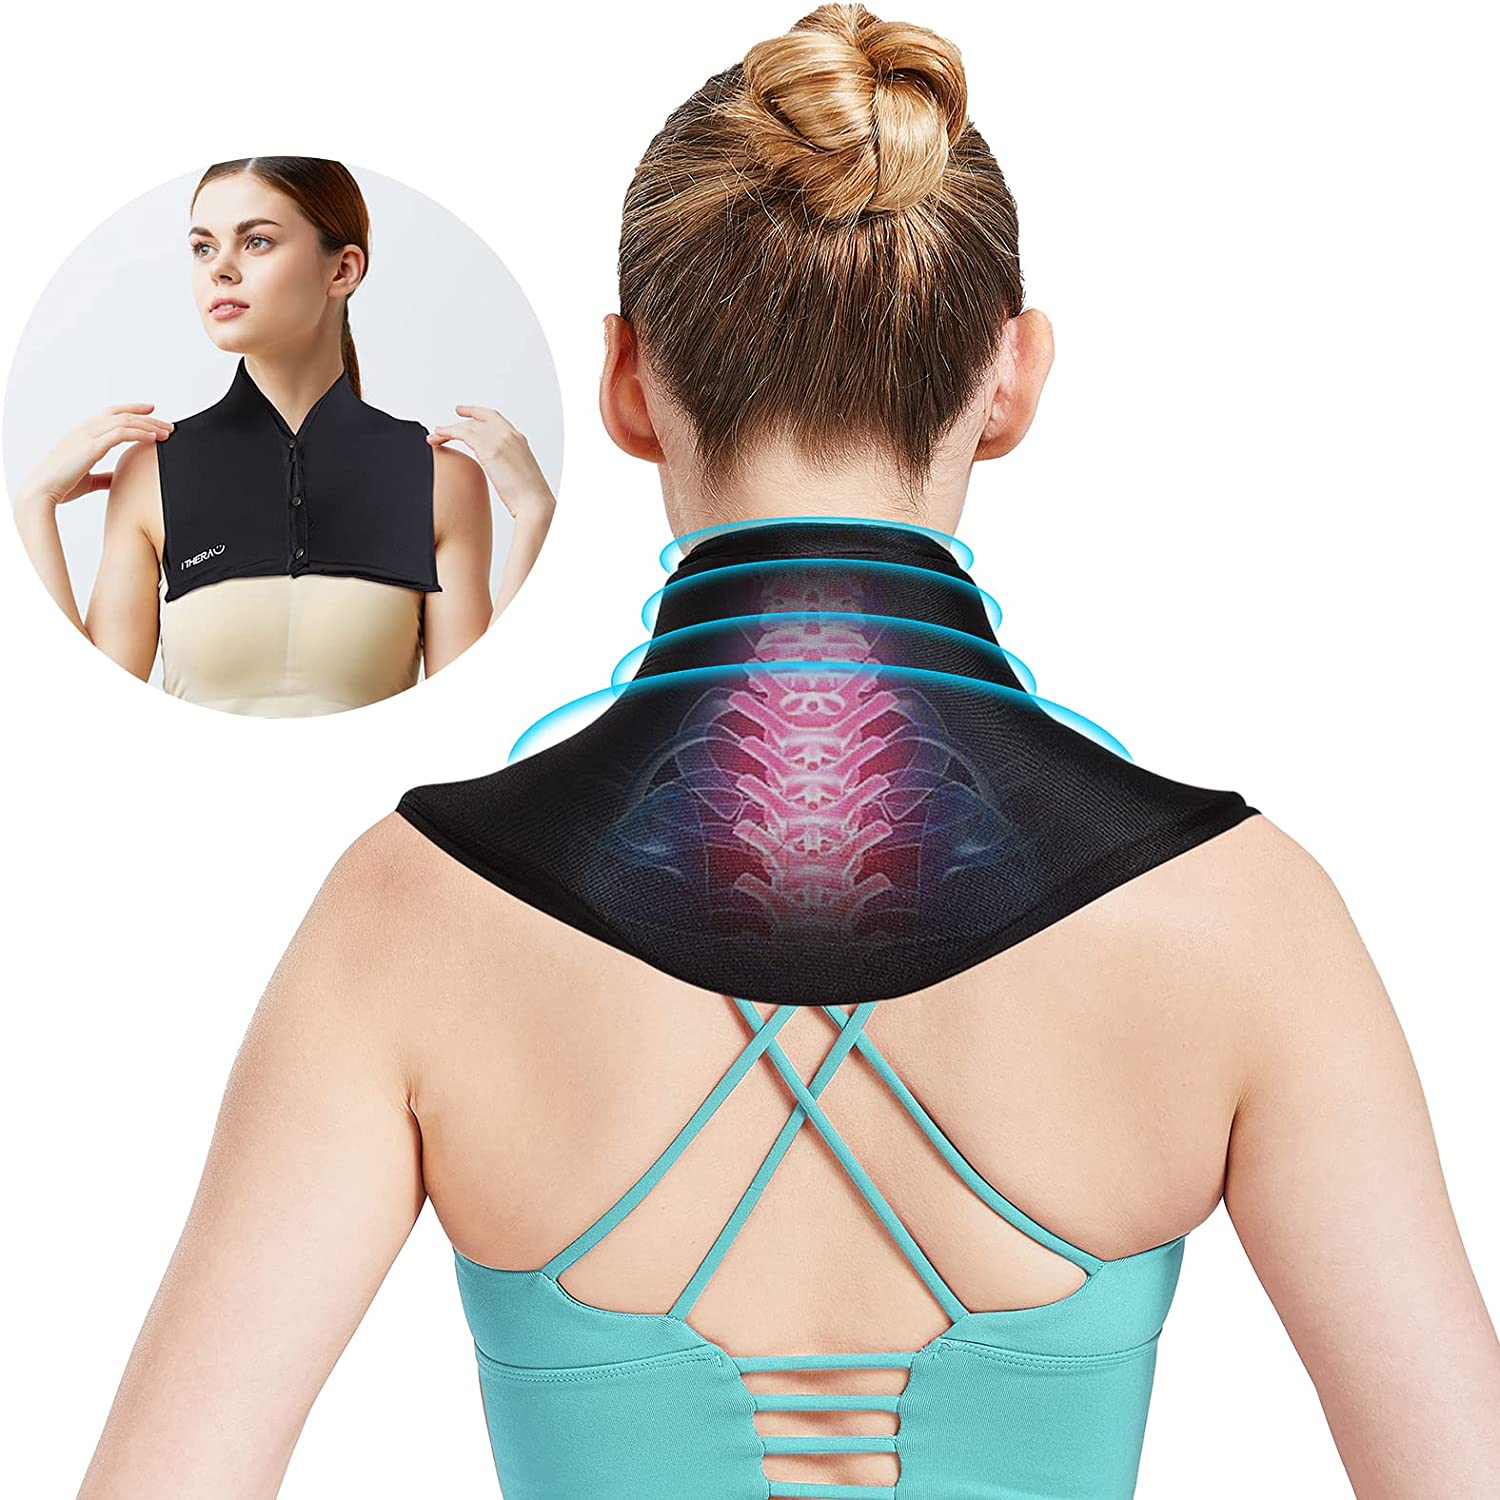 Neck Ice Pack Wrap, RelaxCoo Reusable Gel Ice Pack for Neck Shoulders, Cold  Compress Therapy for Pain Relief, Injuries, Swelling, Bruises, Sprains